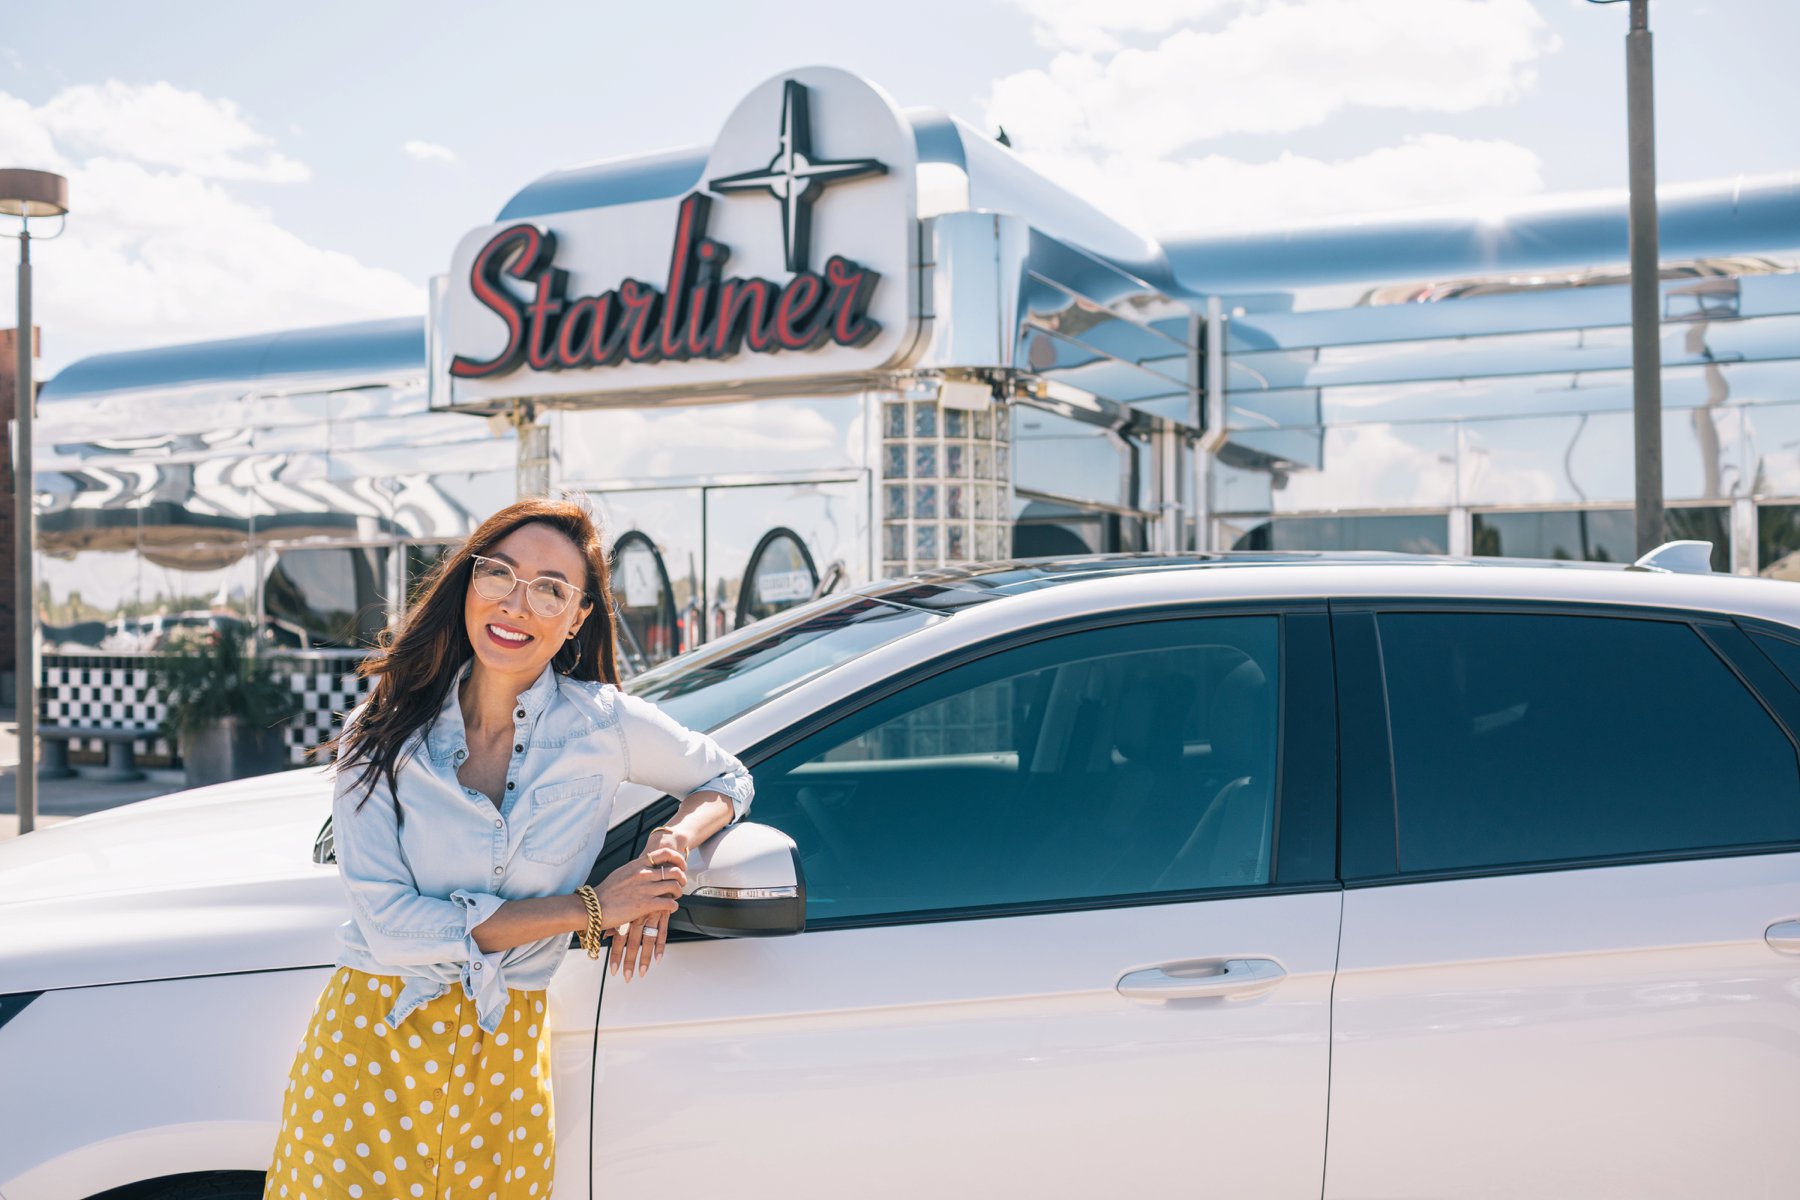 Ford Edge review with Sanderson Ford, lifestyle blogger Diana Elizabeth posing with a car